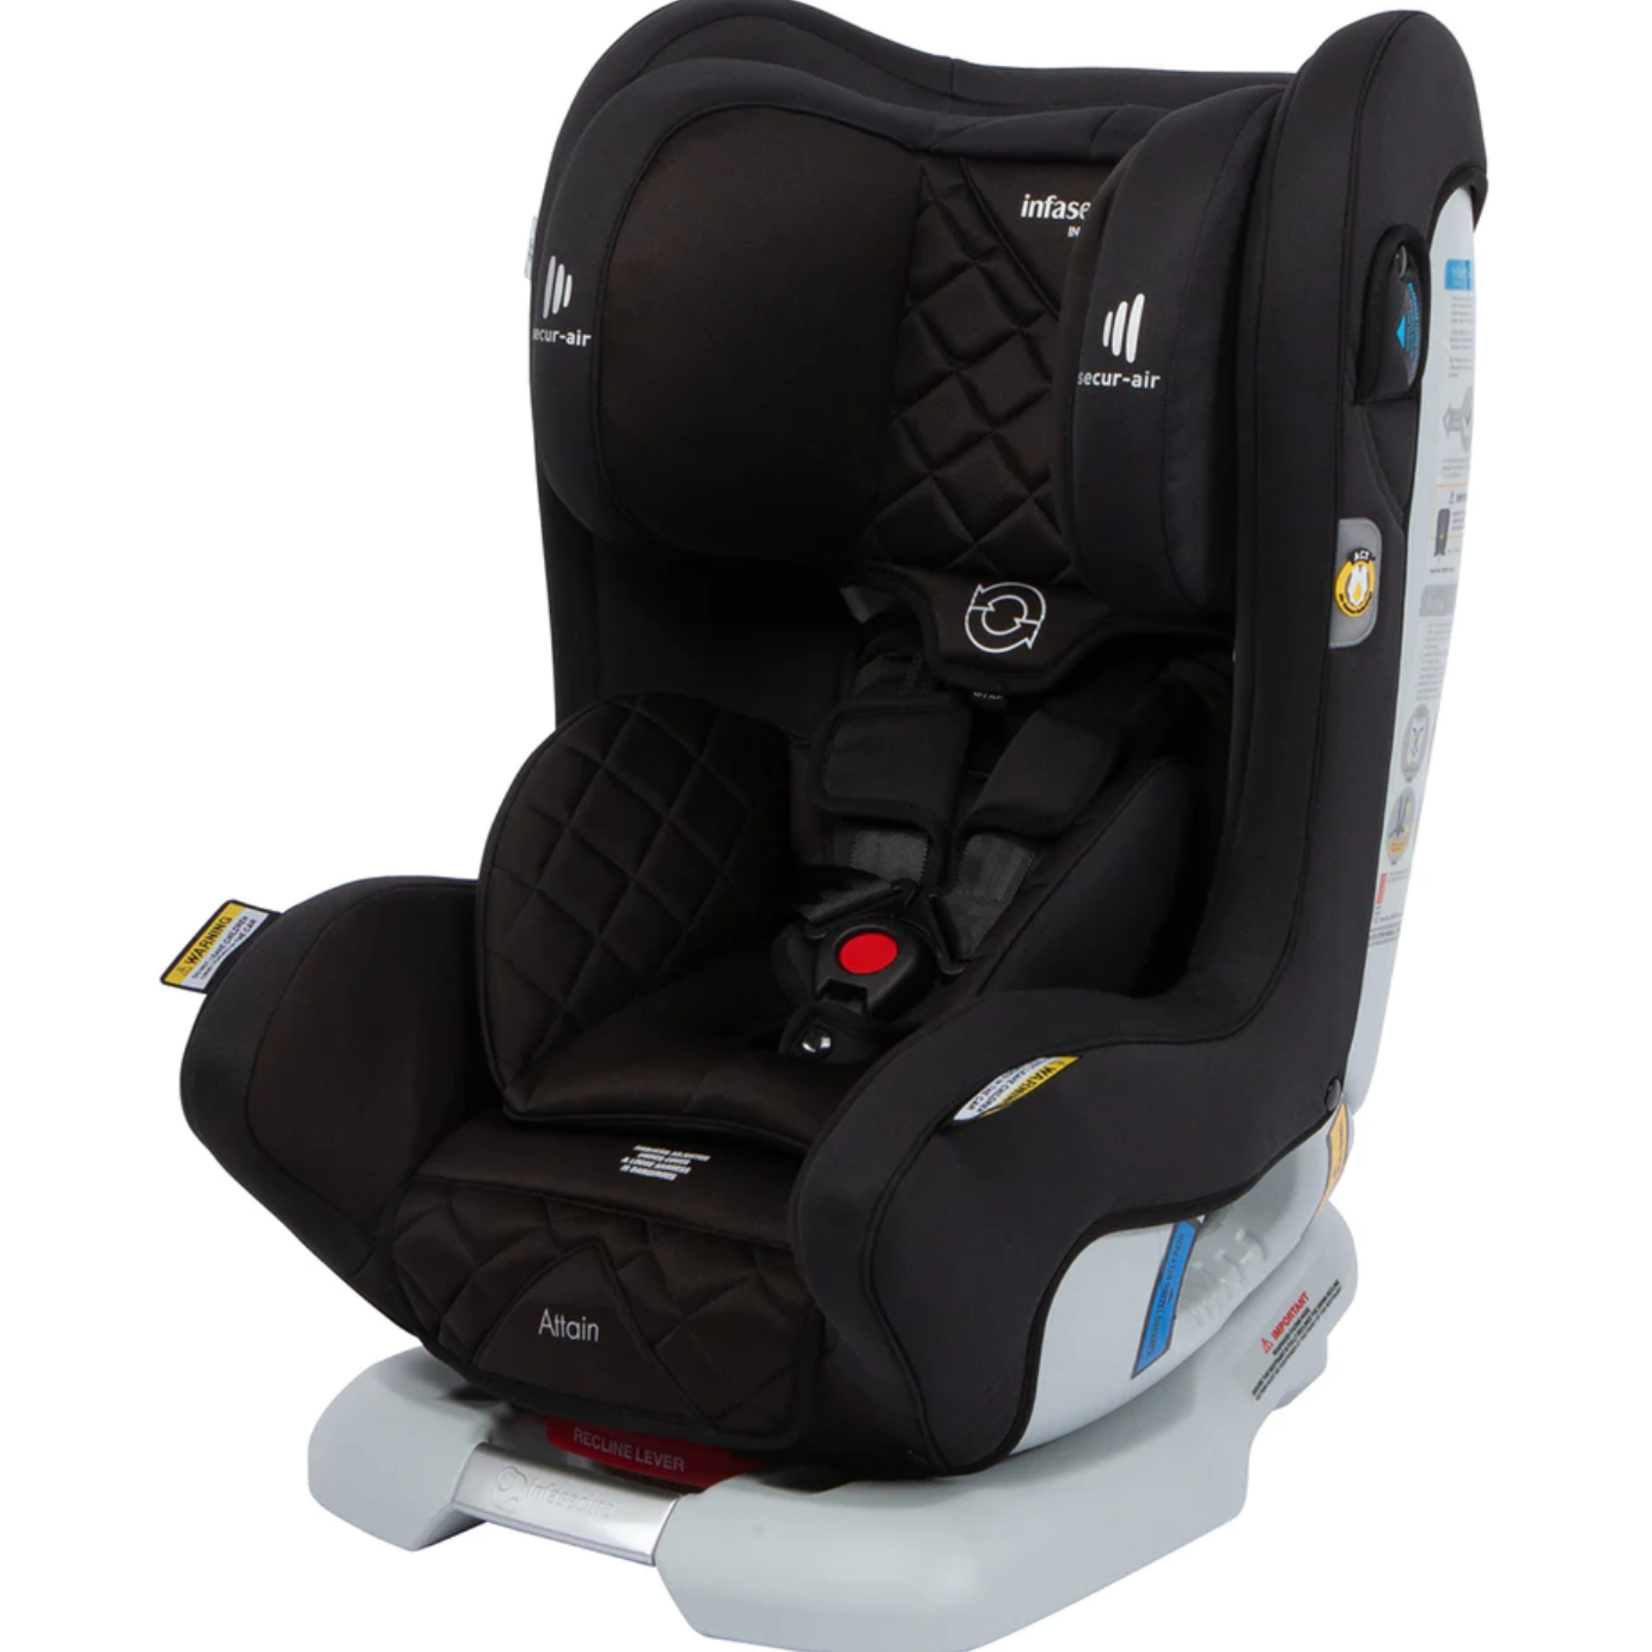 Infasecure Attain More Isofix 0-4years(2013)-Dusk